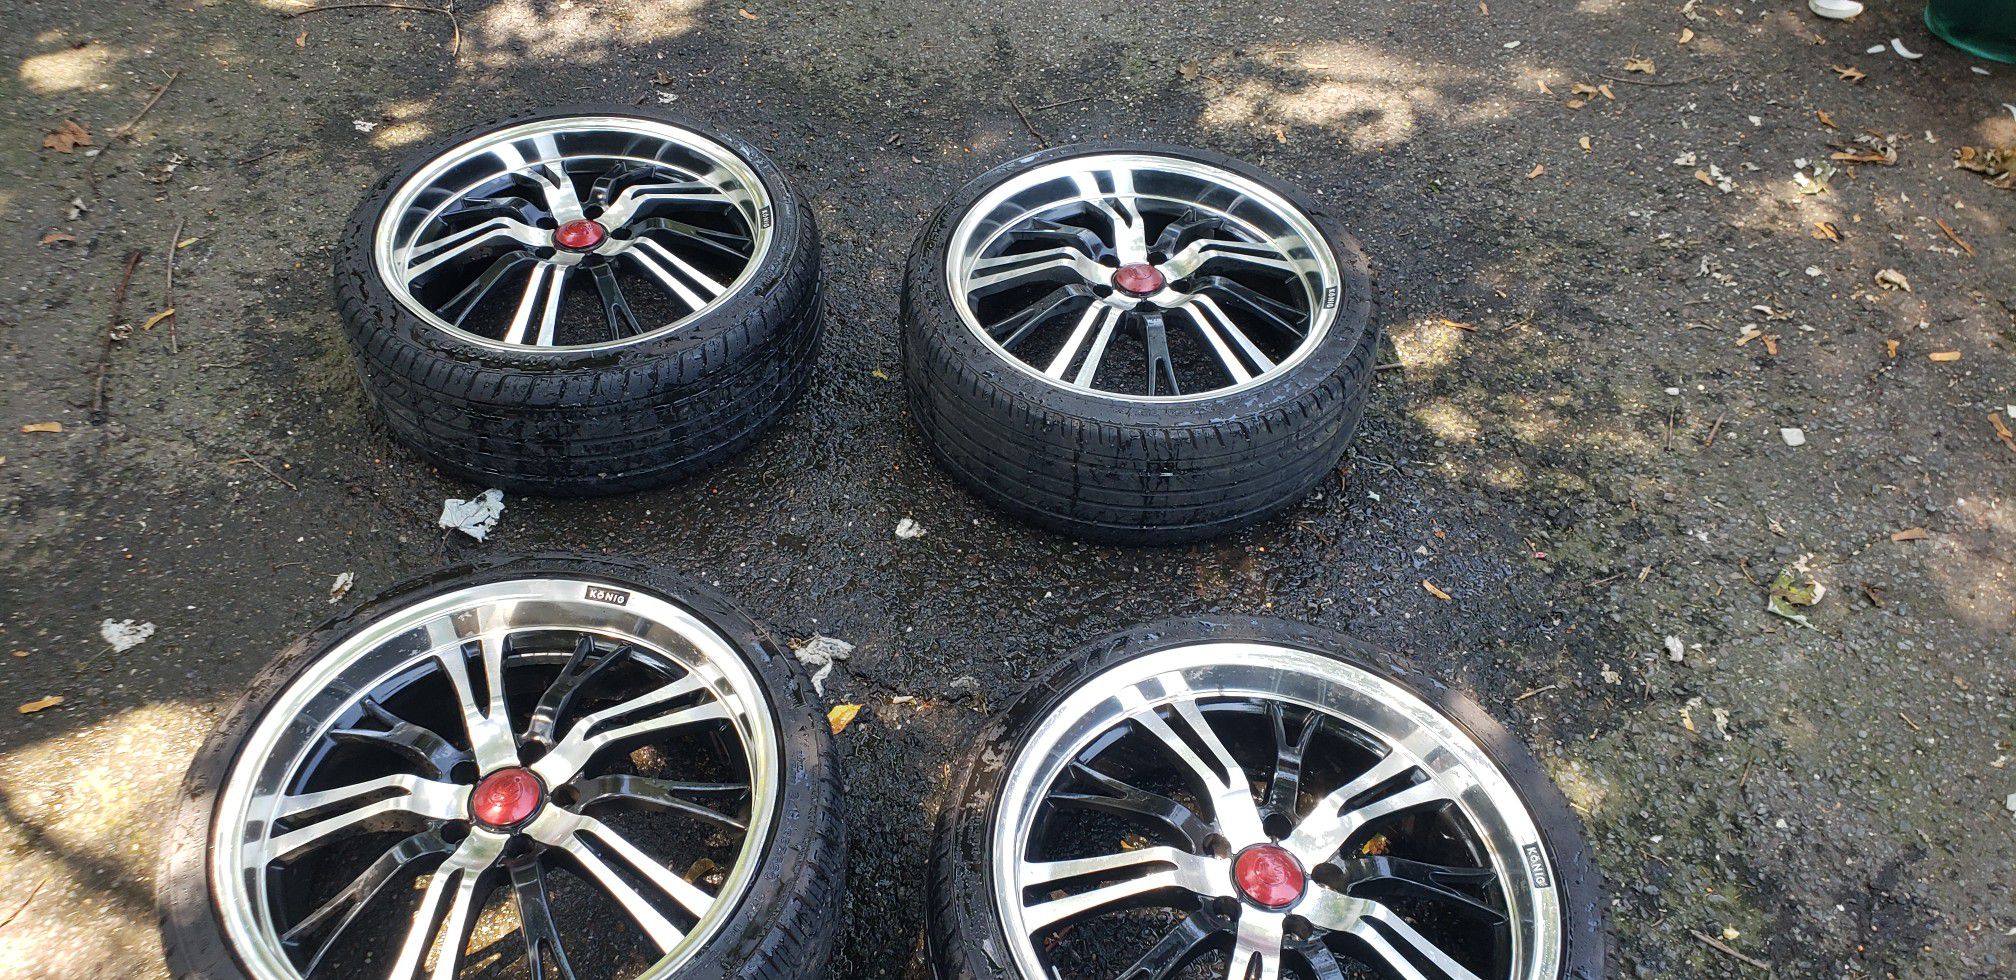 Koing unknown rims size 20 inch almost new tires sure size 245 35 20 good condition could be painted dust on in pictures and specials on two of rims